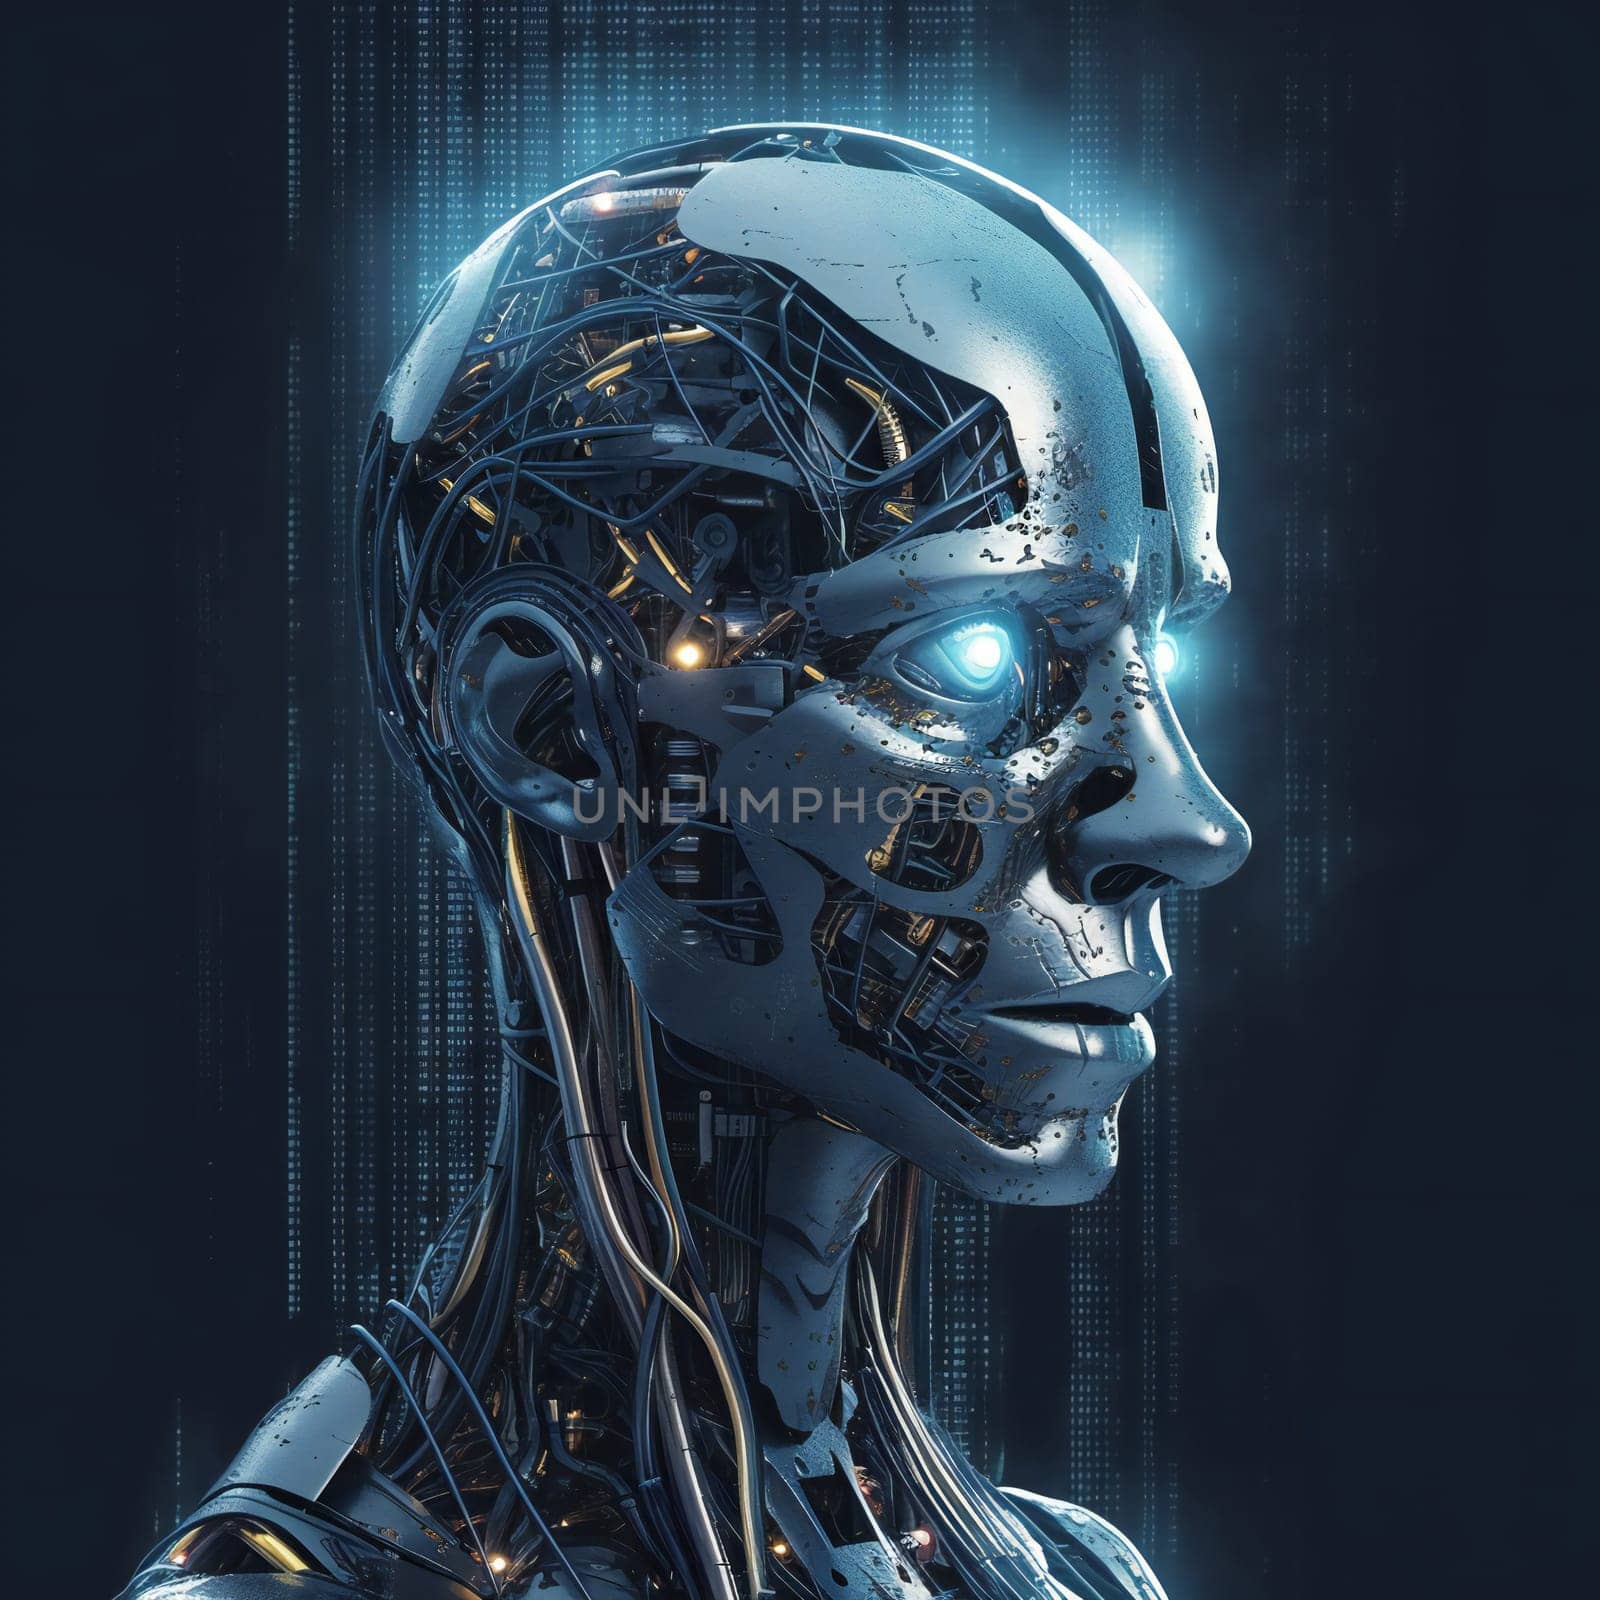 Advanced AI Robot Machine Learning - Technology Related 3D Illustration Render Concept